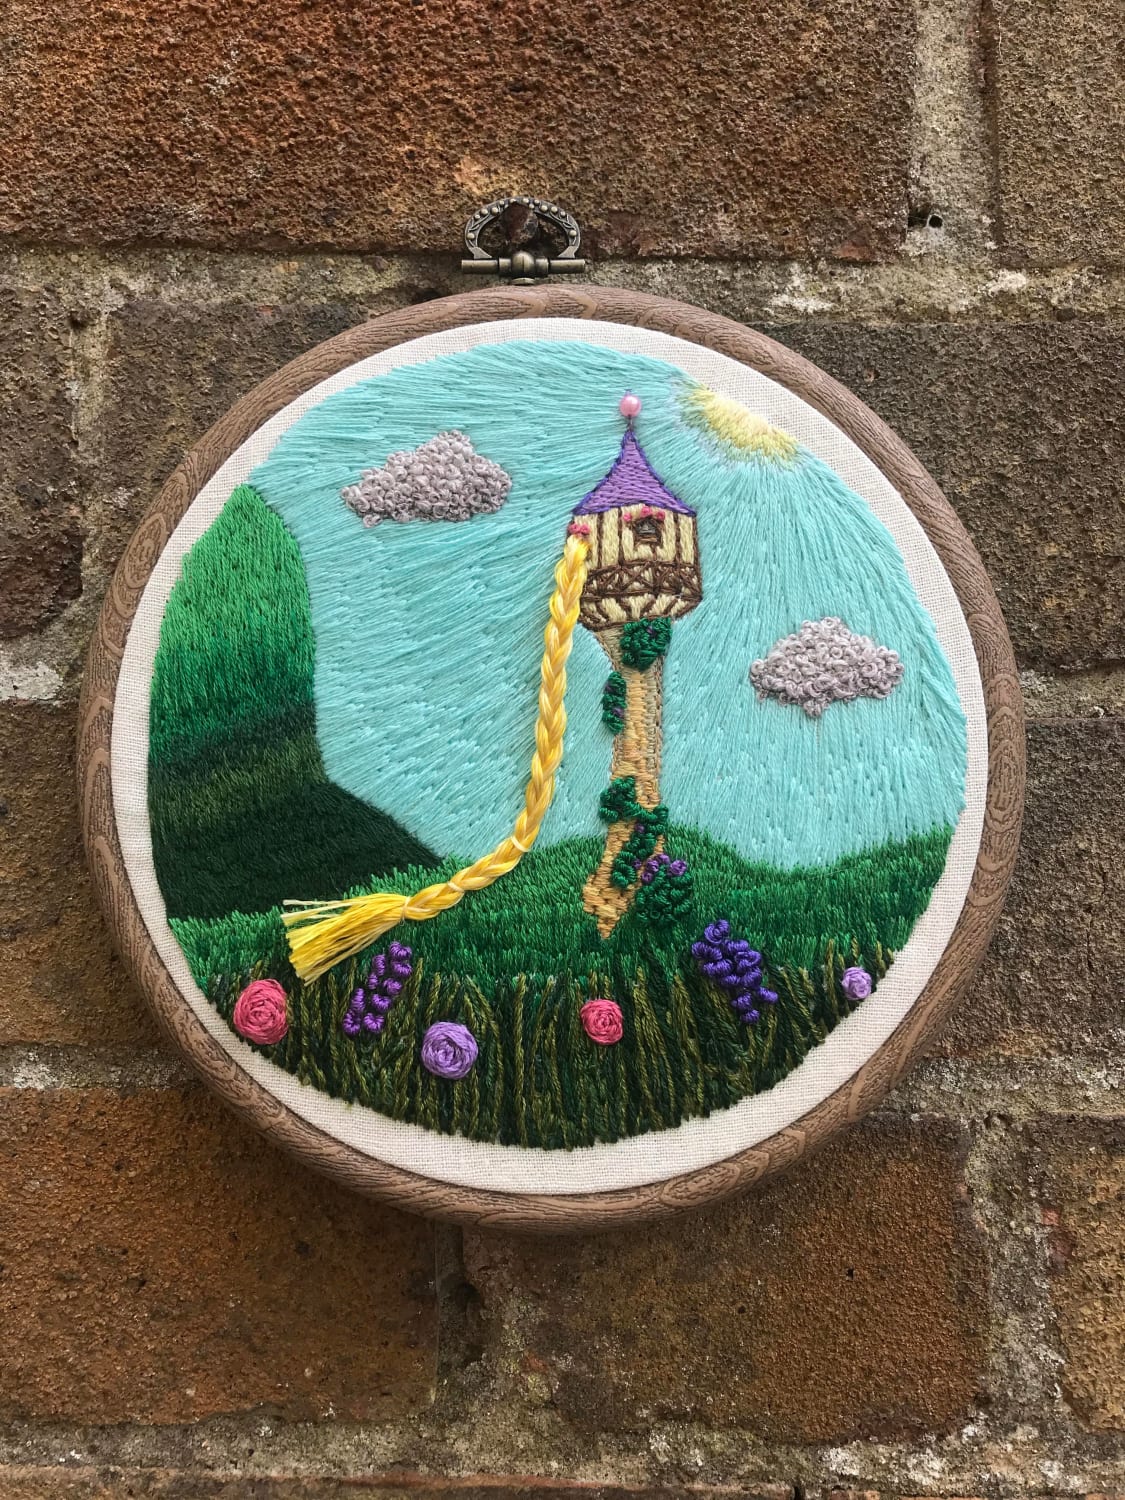 Just finished this Rapunzel/Tangled inspired embroidery, one of my own designs. It’s taken months so I’m feeling proud even though it isn’t perfect!